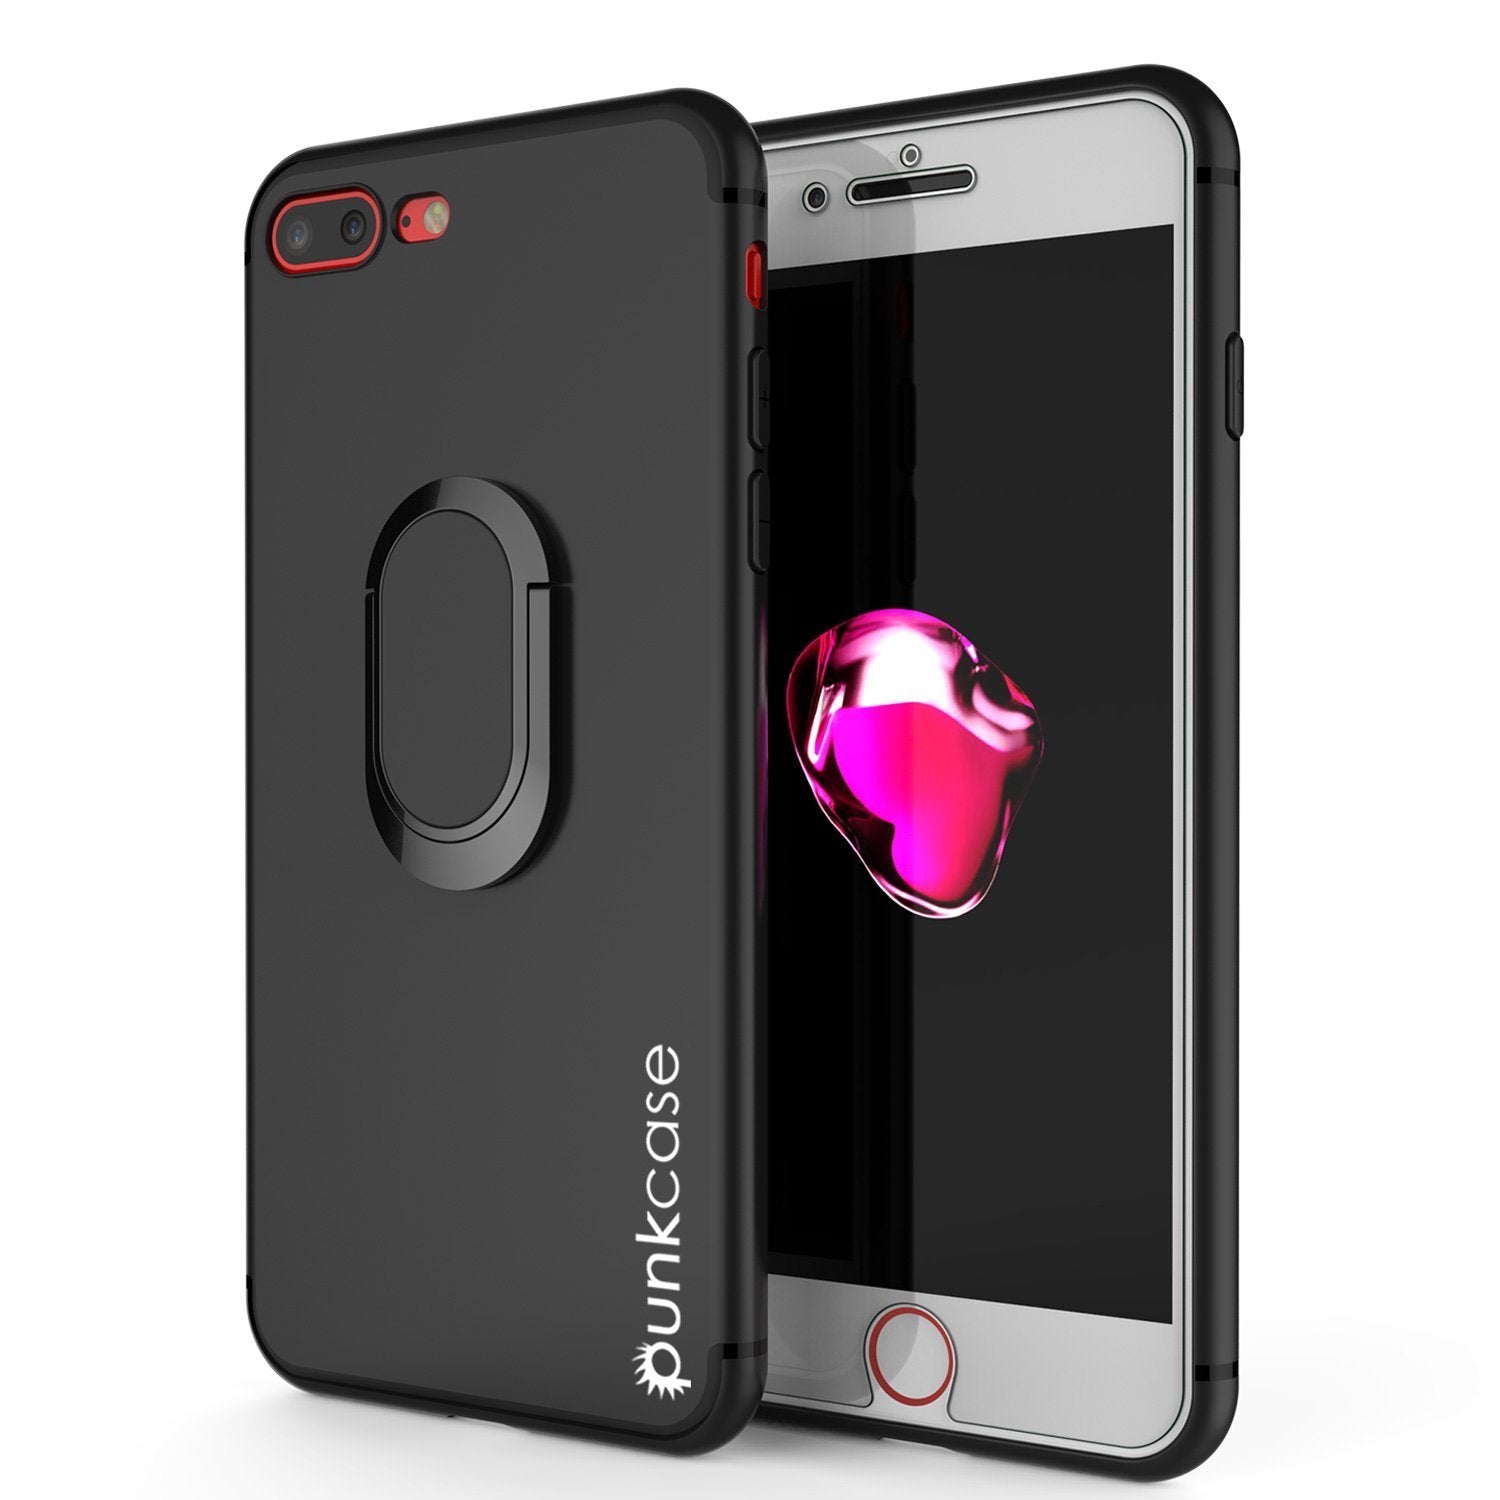 iPhone 8 PLUS Case, Punkcase Magnetix Protective TPU Cover W/ Kickstand, Tempered Glass Screen Protector [Black] - PunkCase NZ